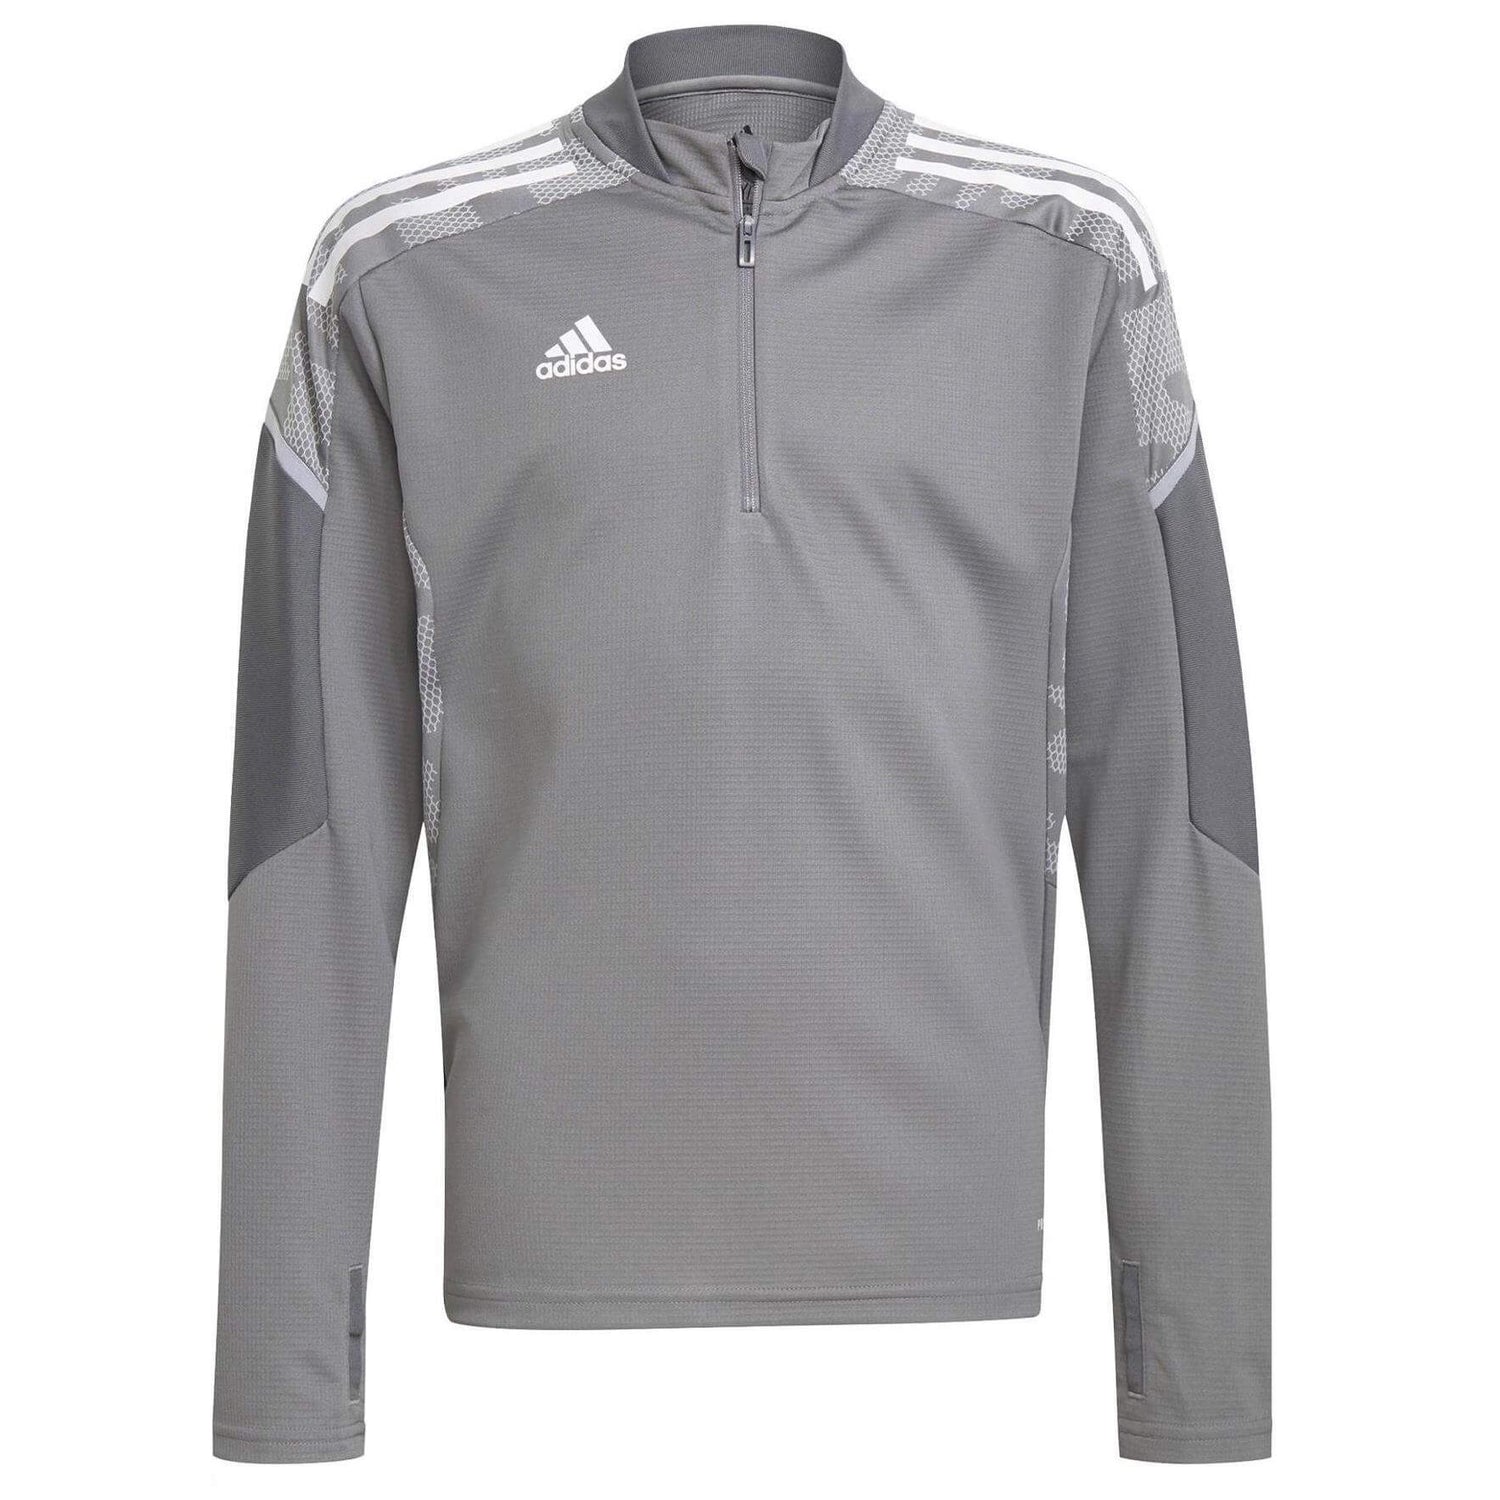 Adidas Condivo 21 Youth Training Top Team Grey (Front)